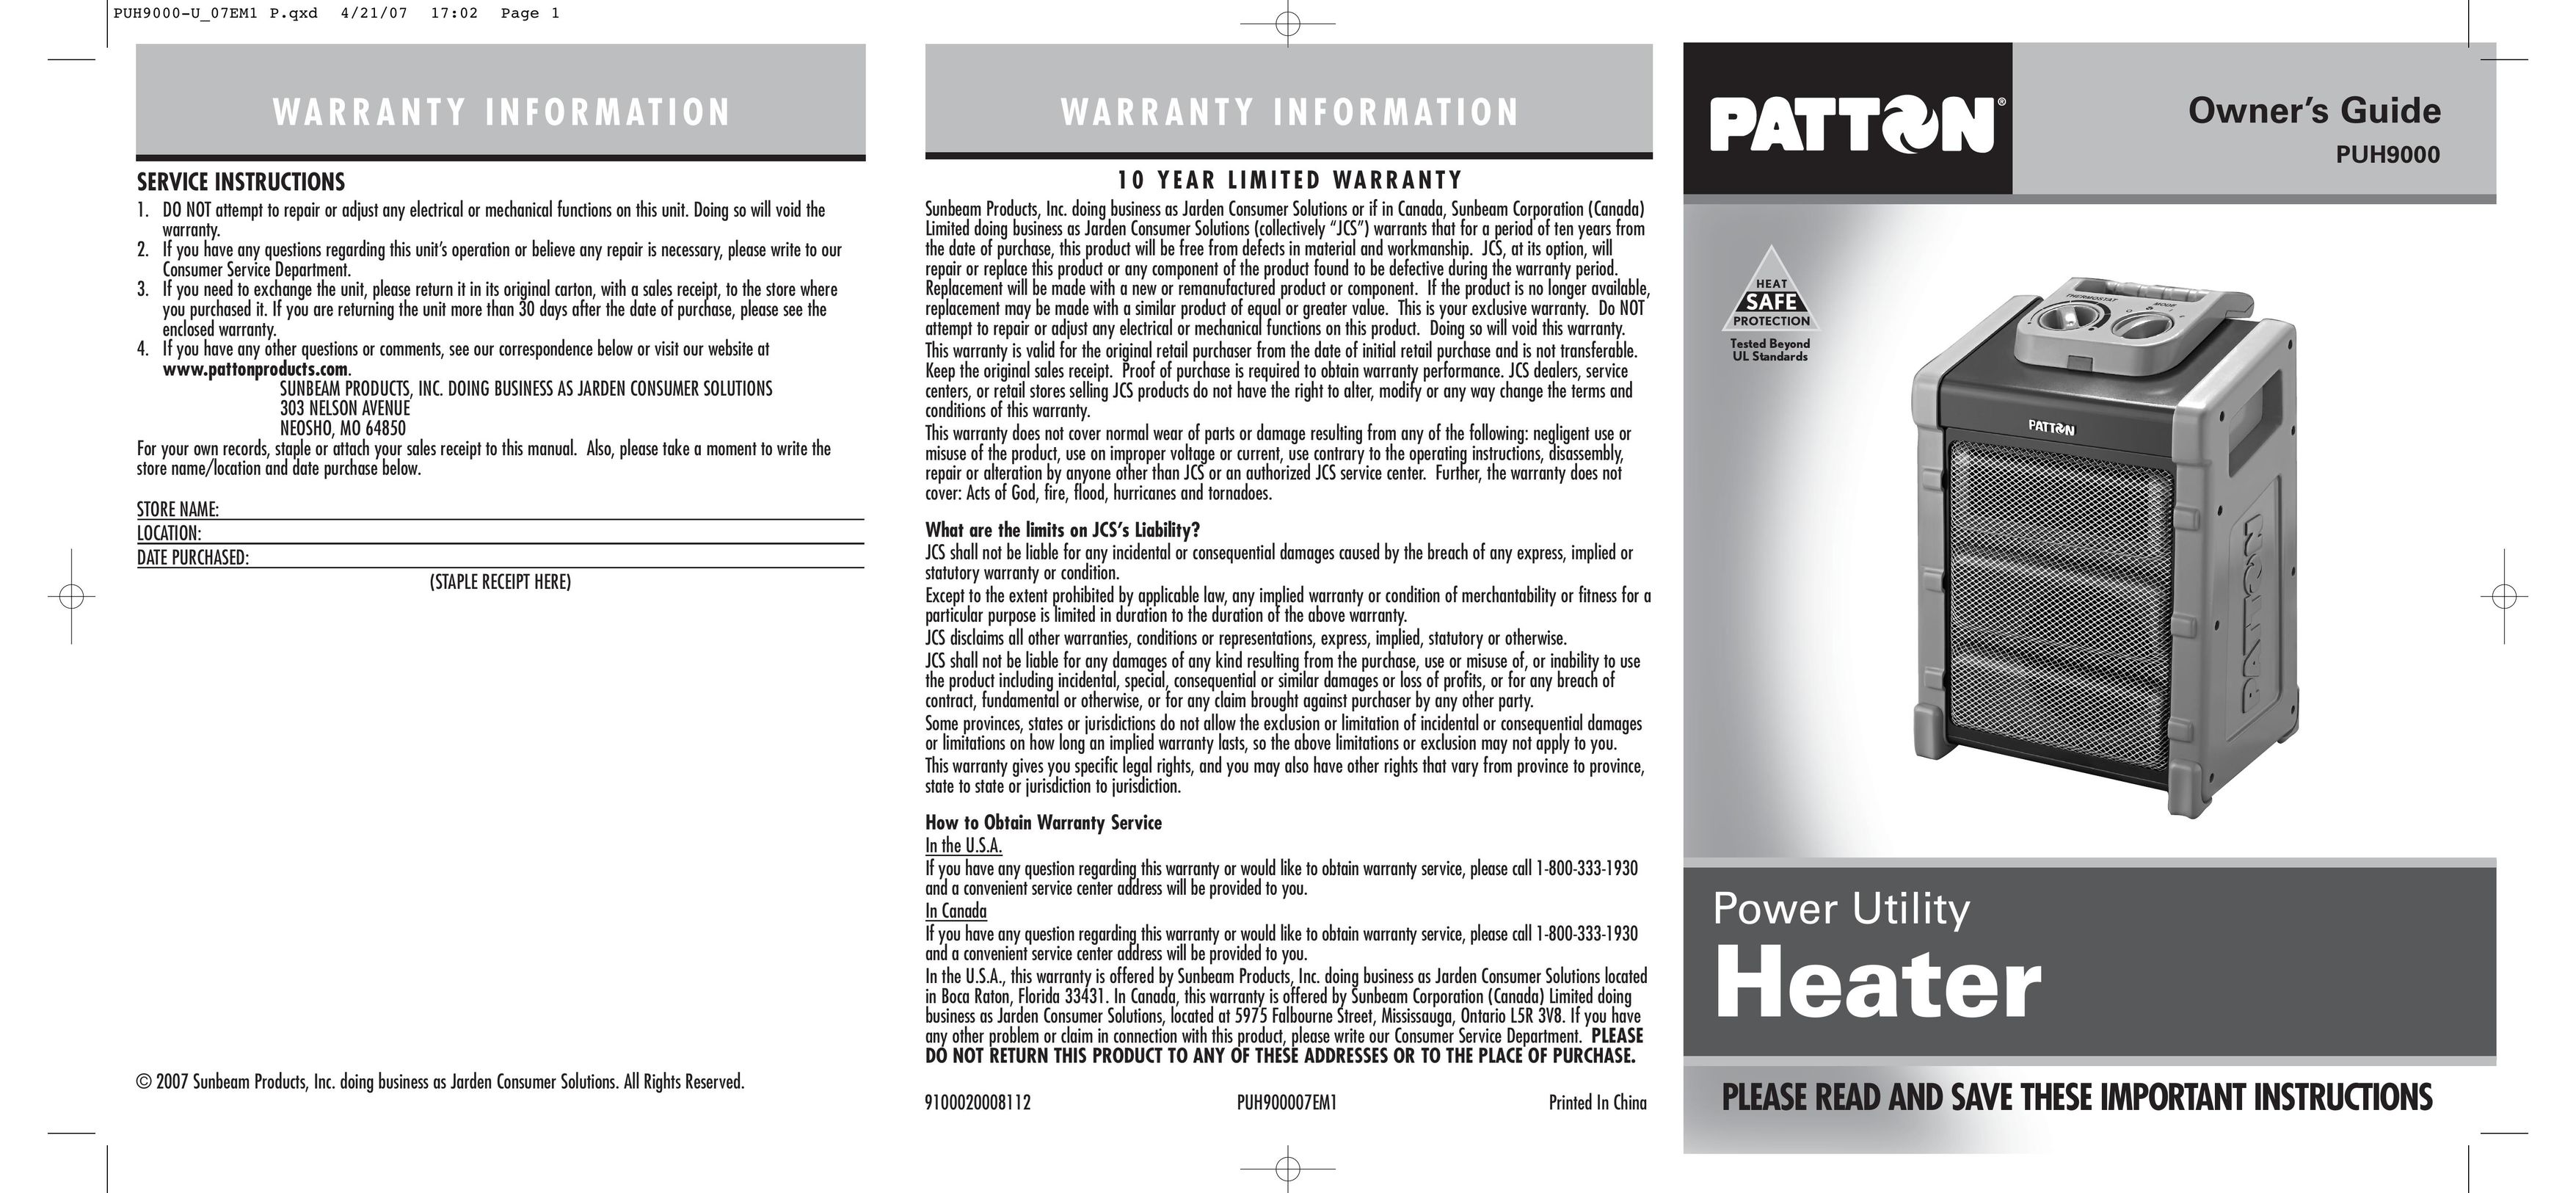 Patton electronic PUH9000 Water Heater User Manual